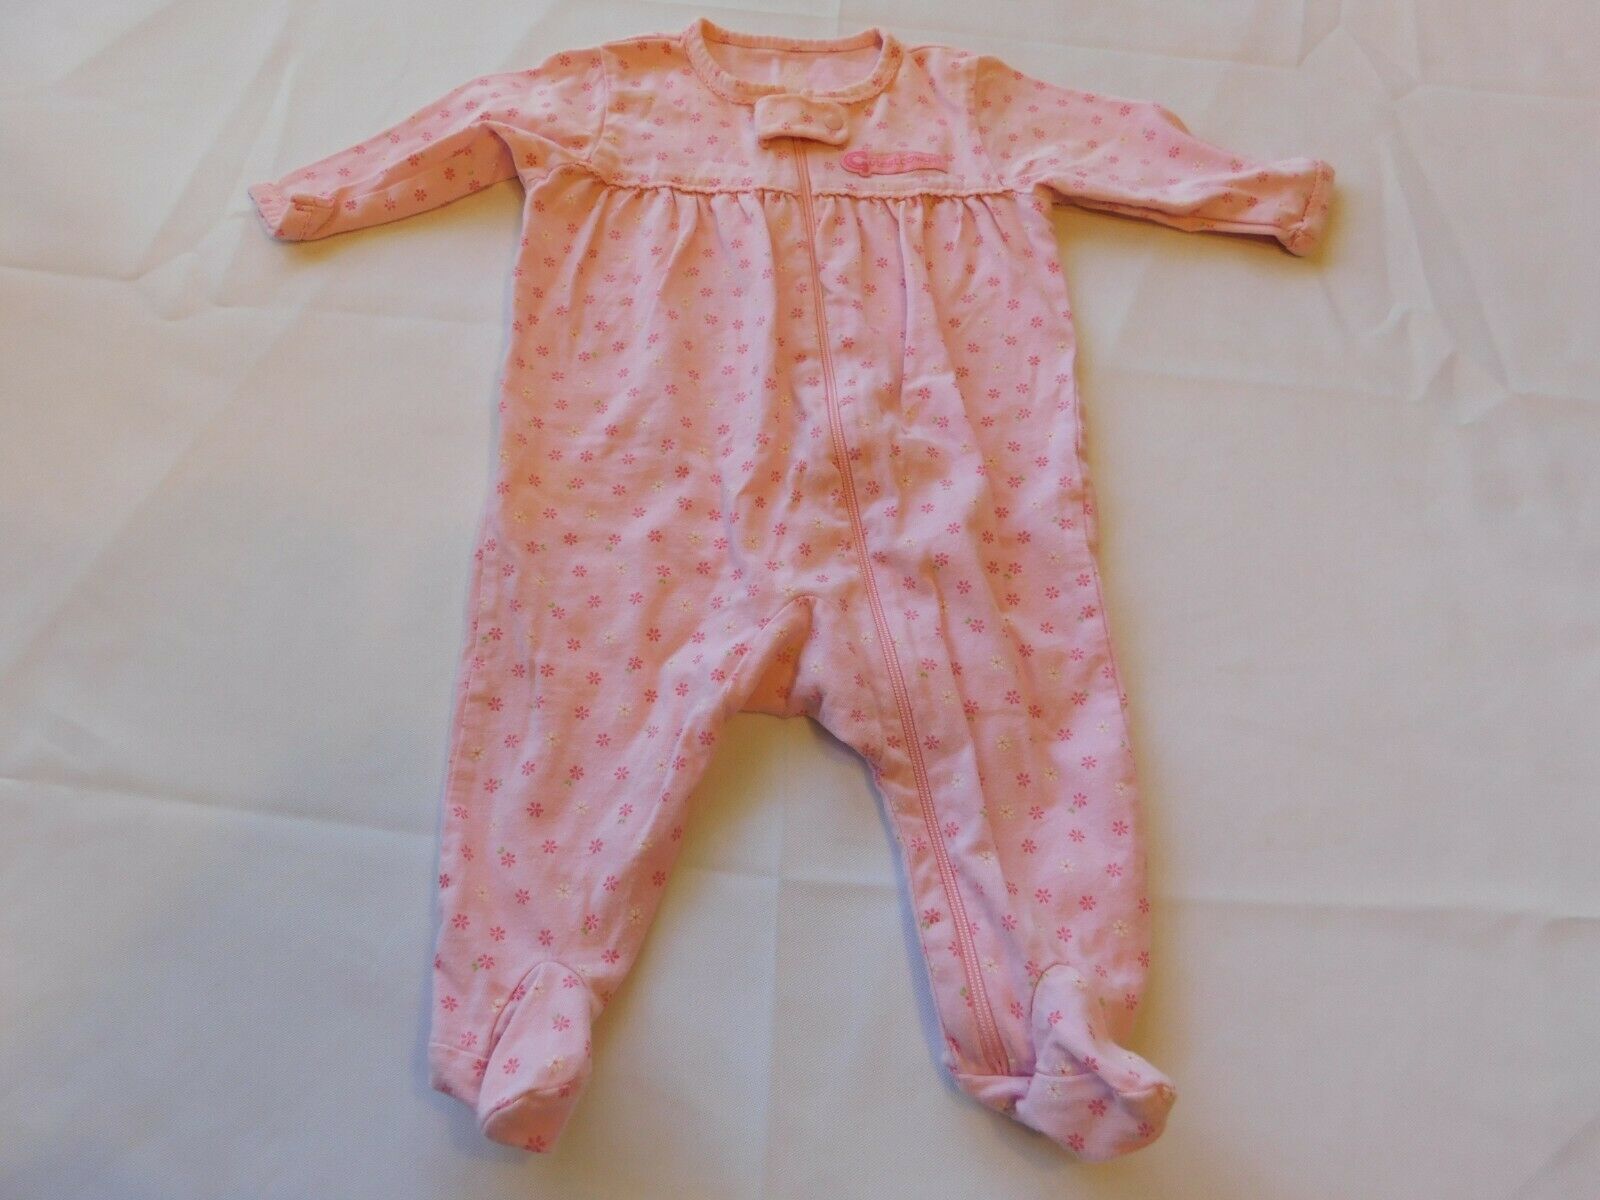 Carter's Just One Year Baby Girls One Piece Footed PJs Sleep PJ Size S small GUC - $19.79